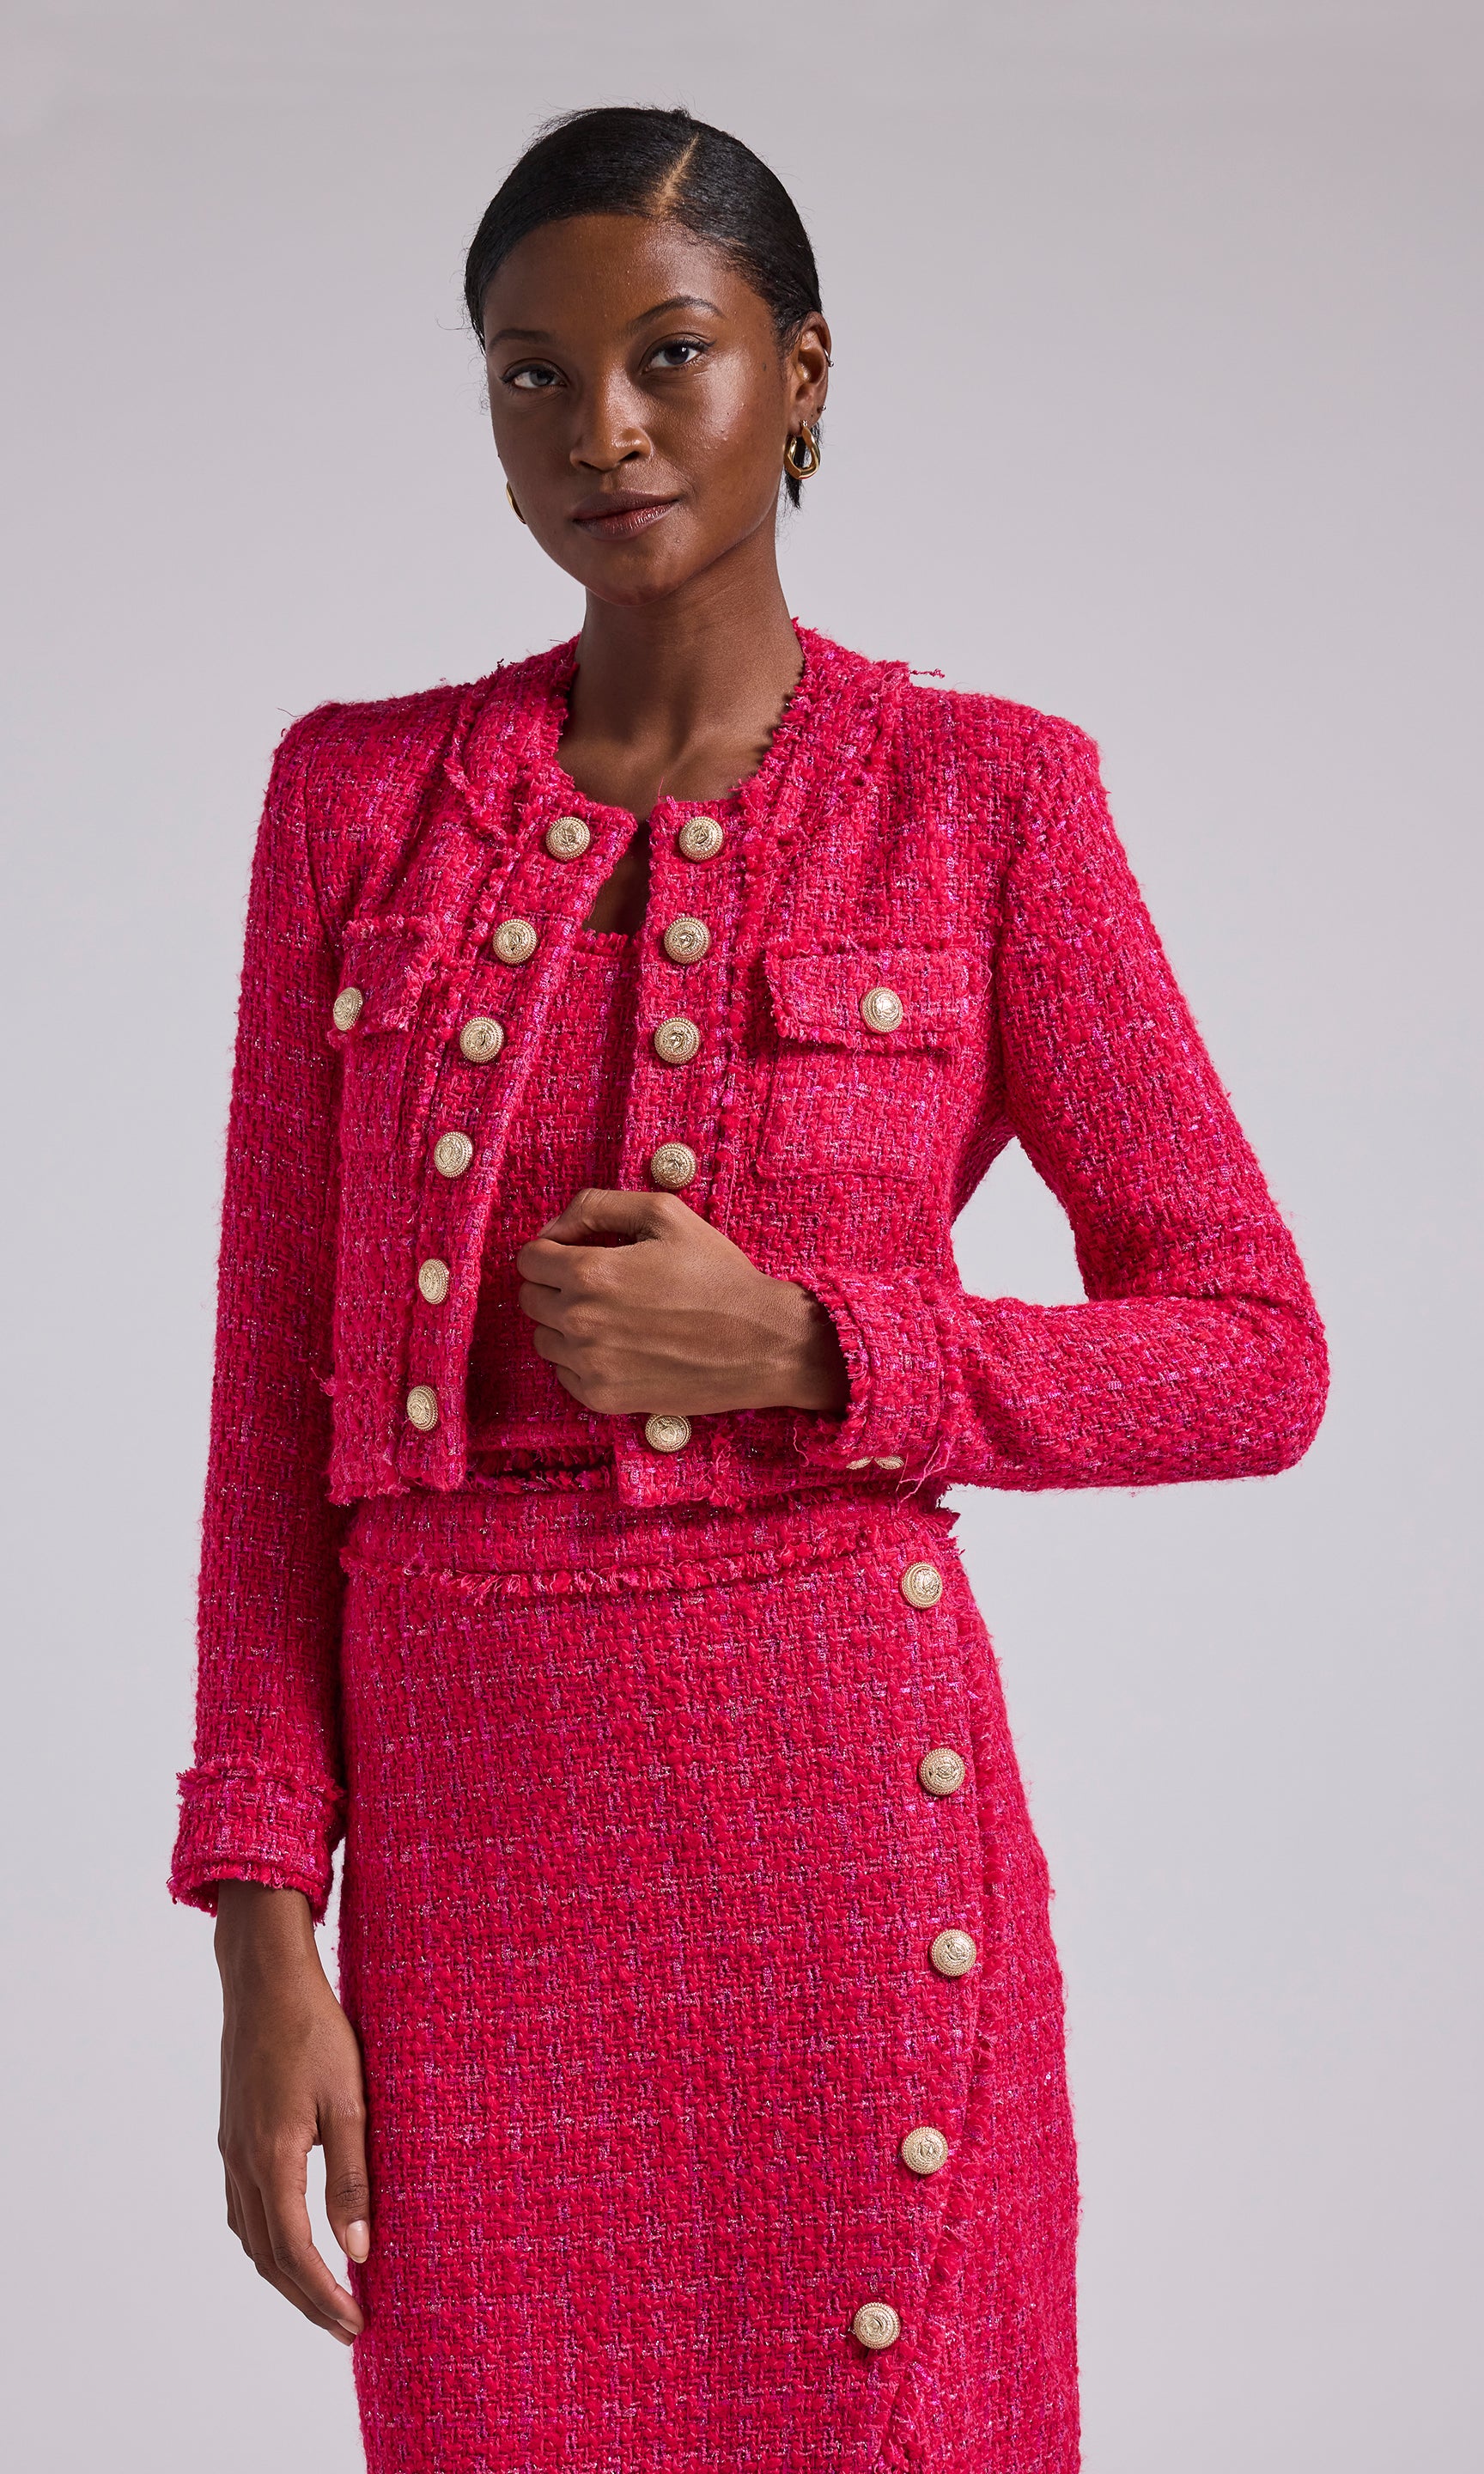 tweed jacket womens outfits. this jacket is under $50 and so